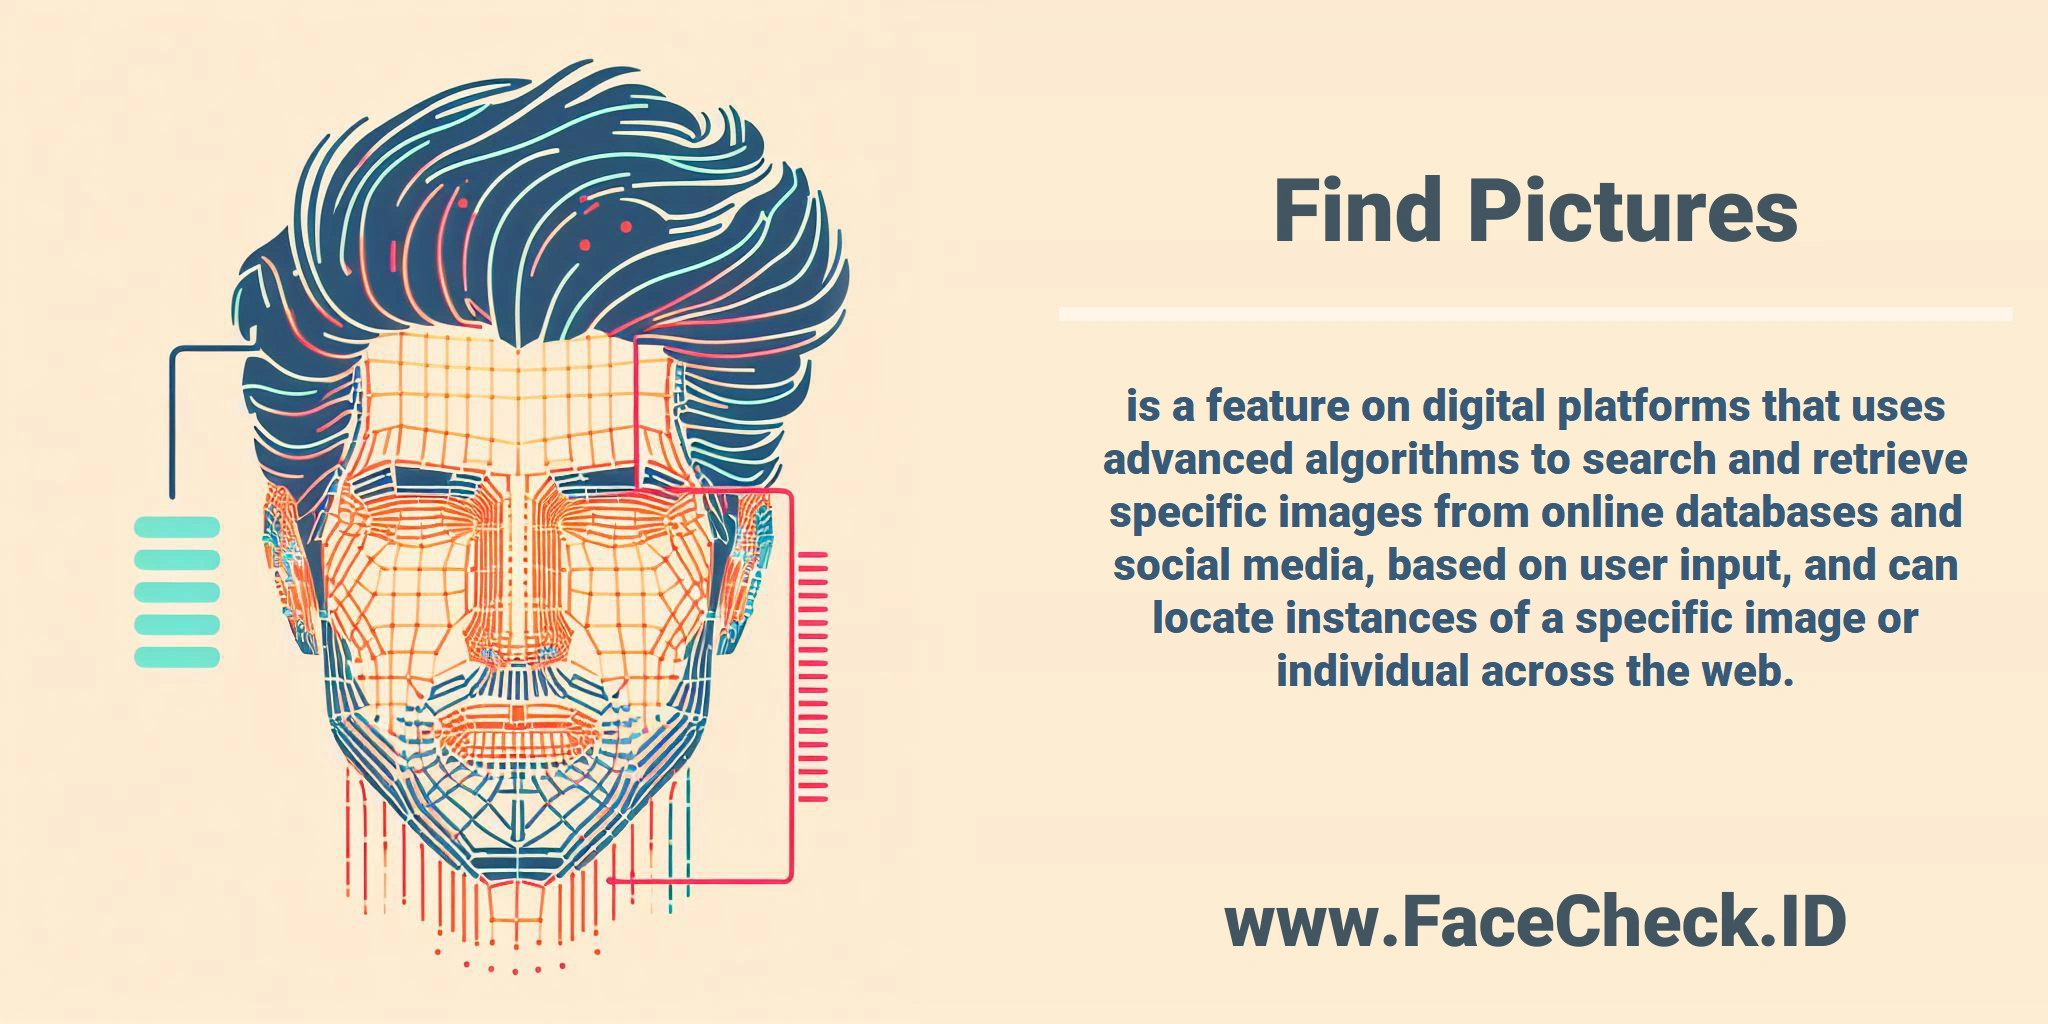 <b>Find Pictures</b> is a feature on digital platforms that uses advanced algorithms to search and retrieve specific images from online databases and social media, based on user input, and can locate instances of a specific image or individual across the web.